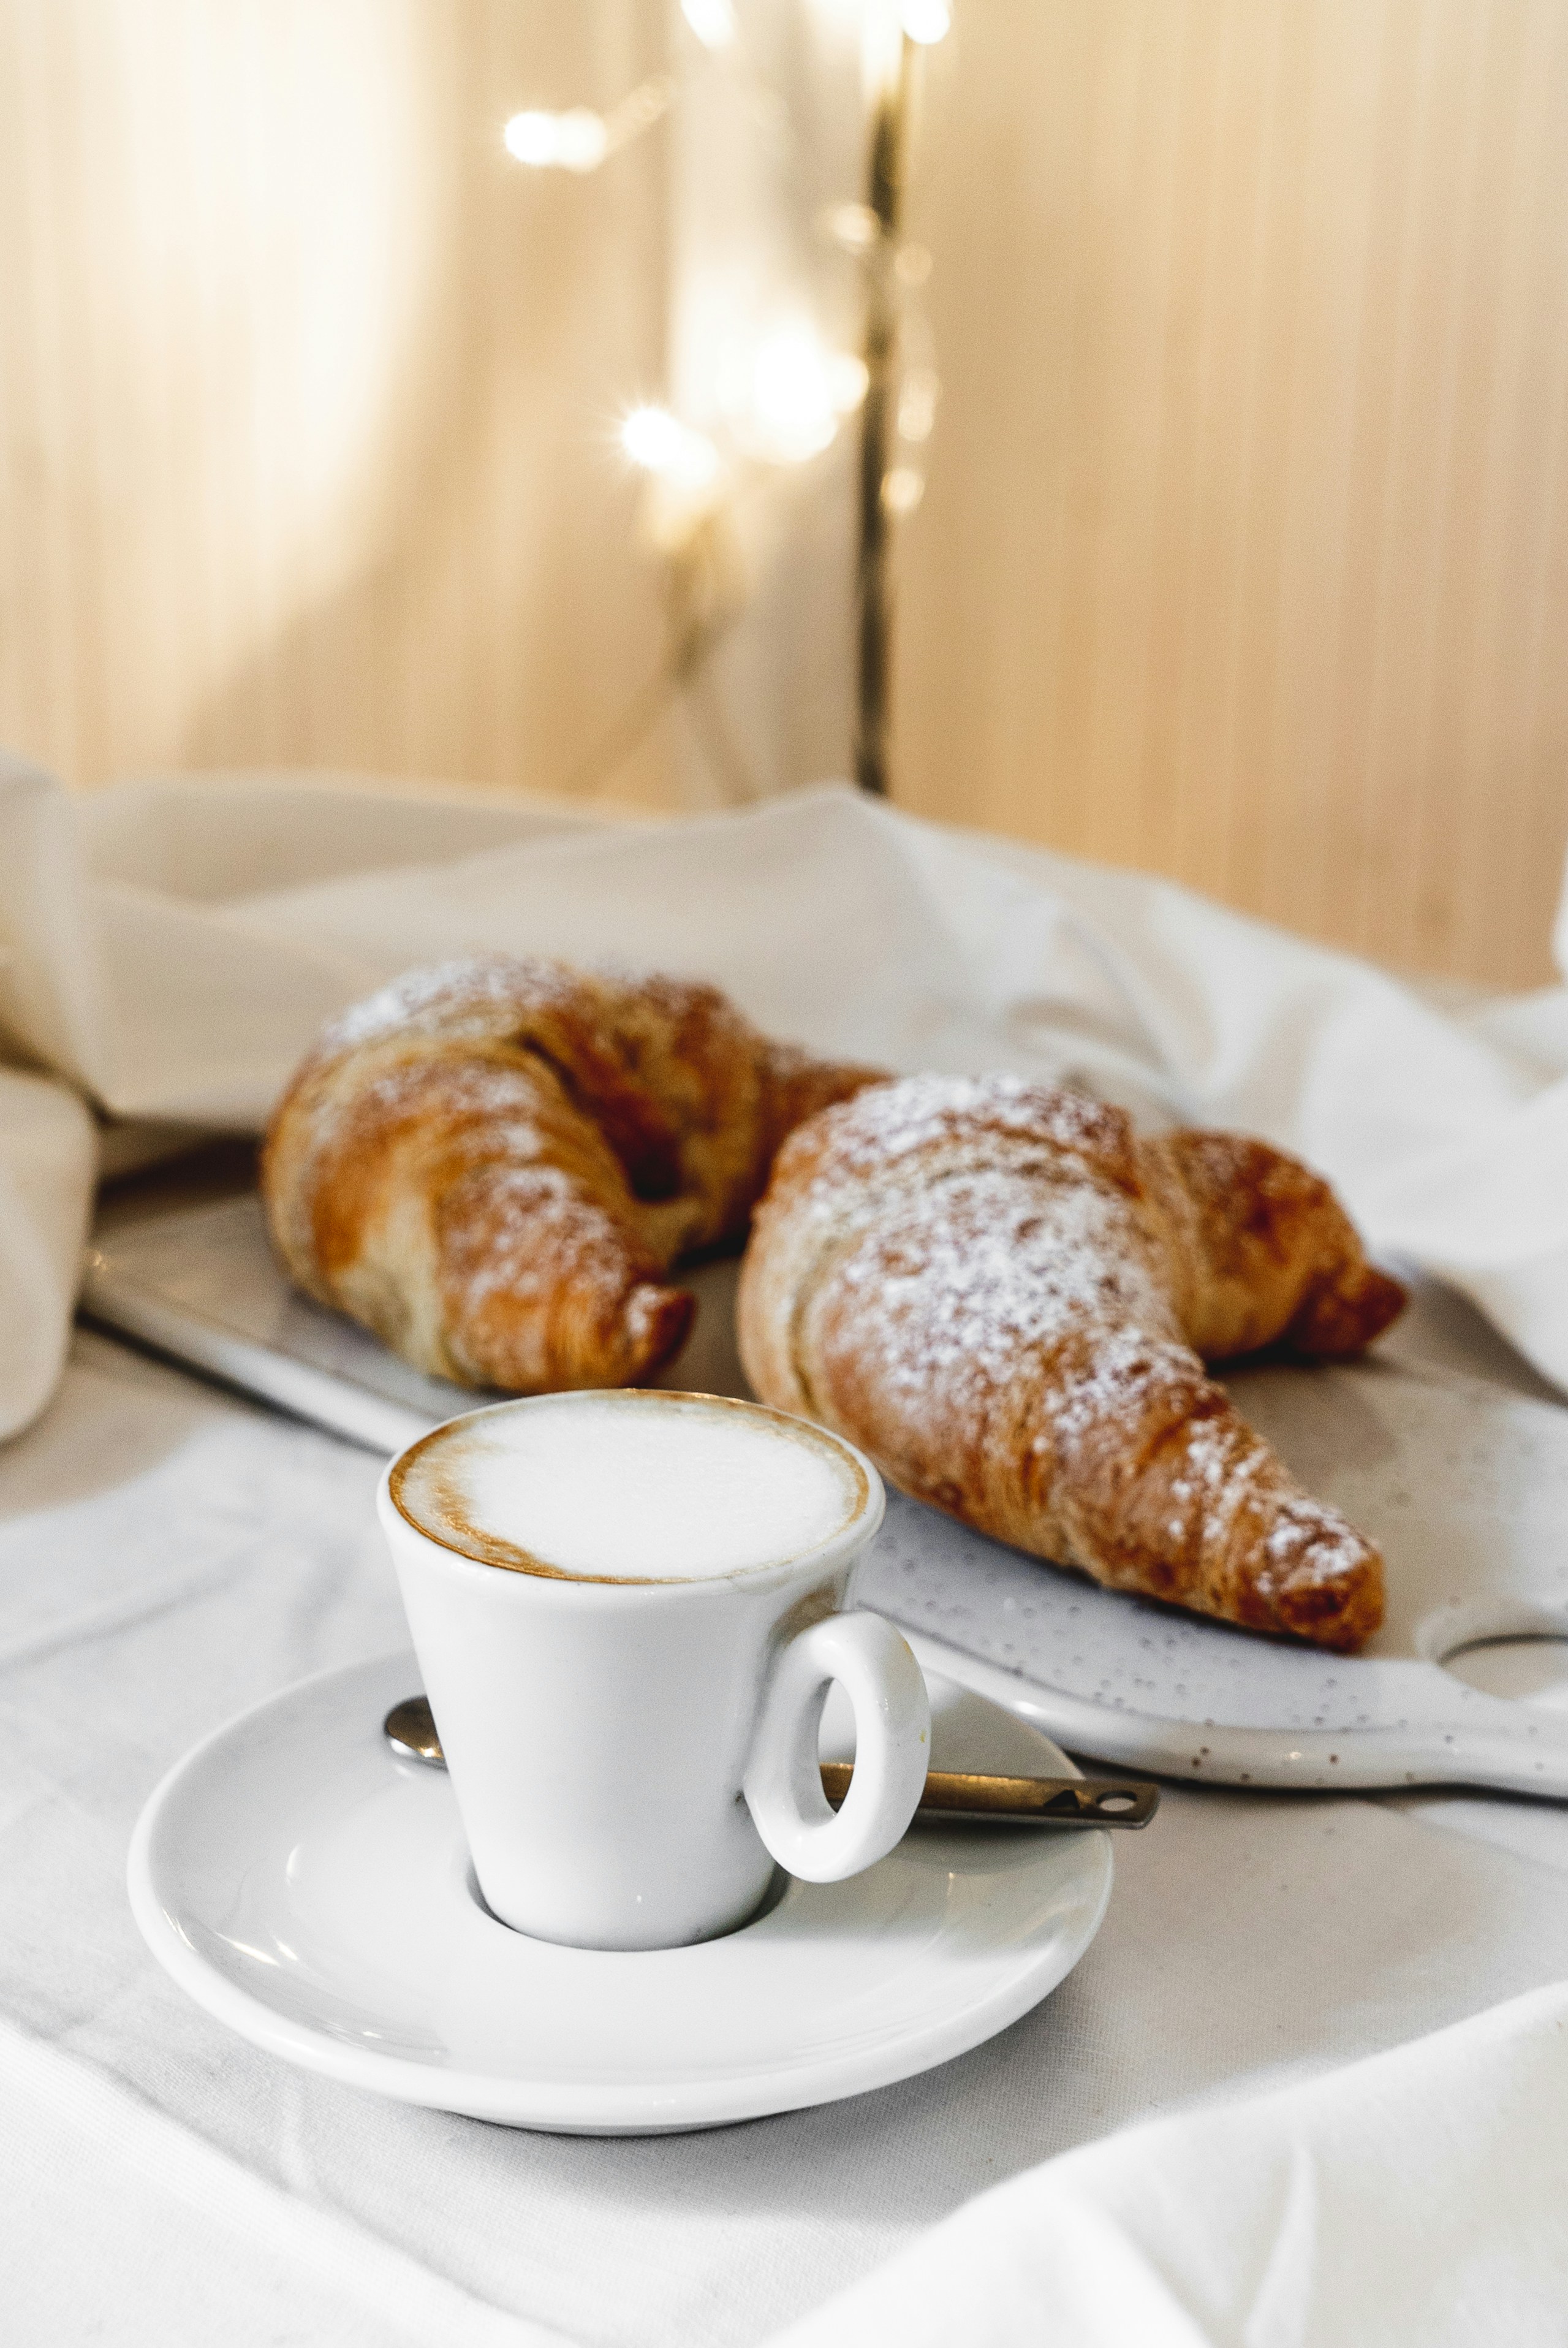 Italian Coffee Culture And Traditions